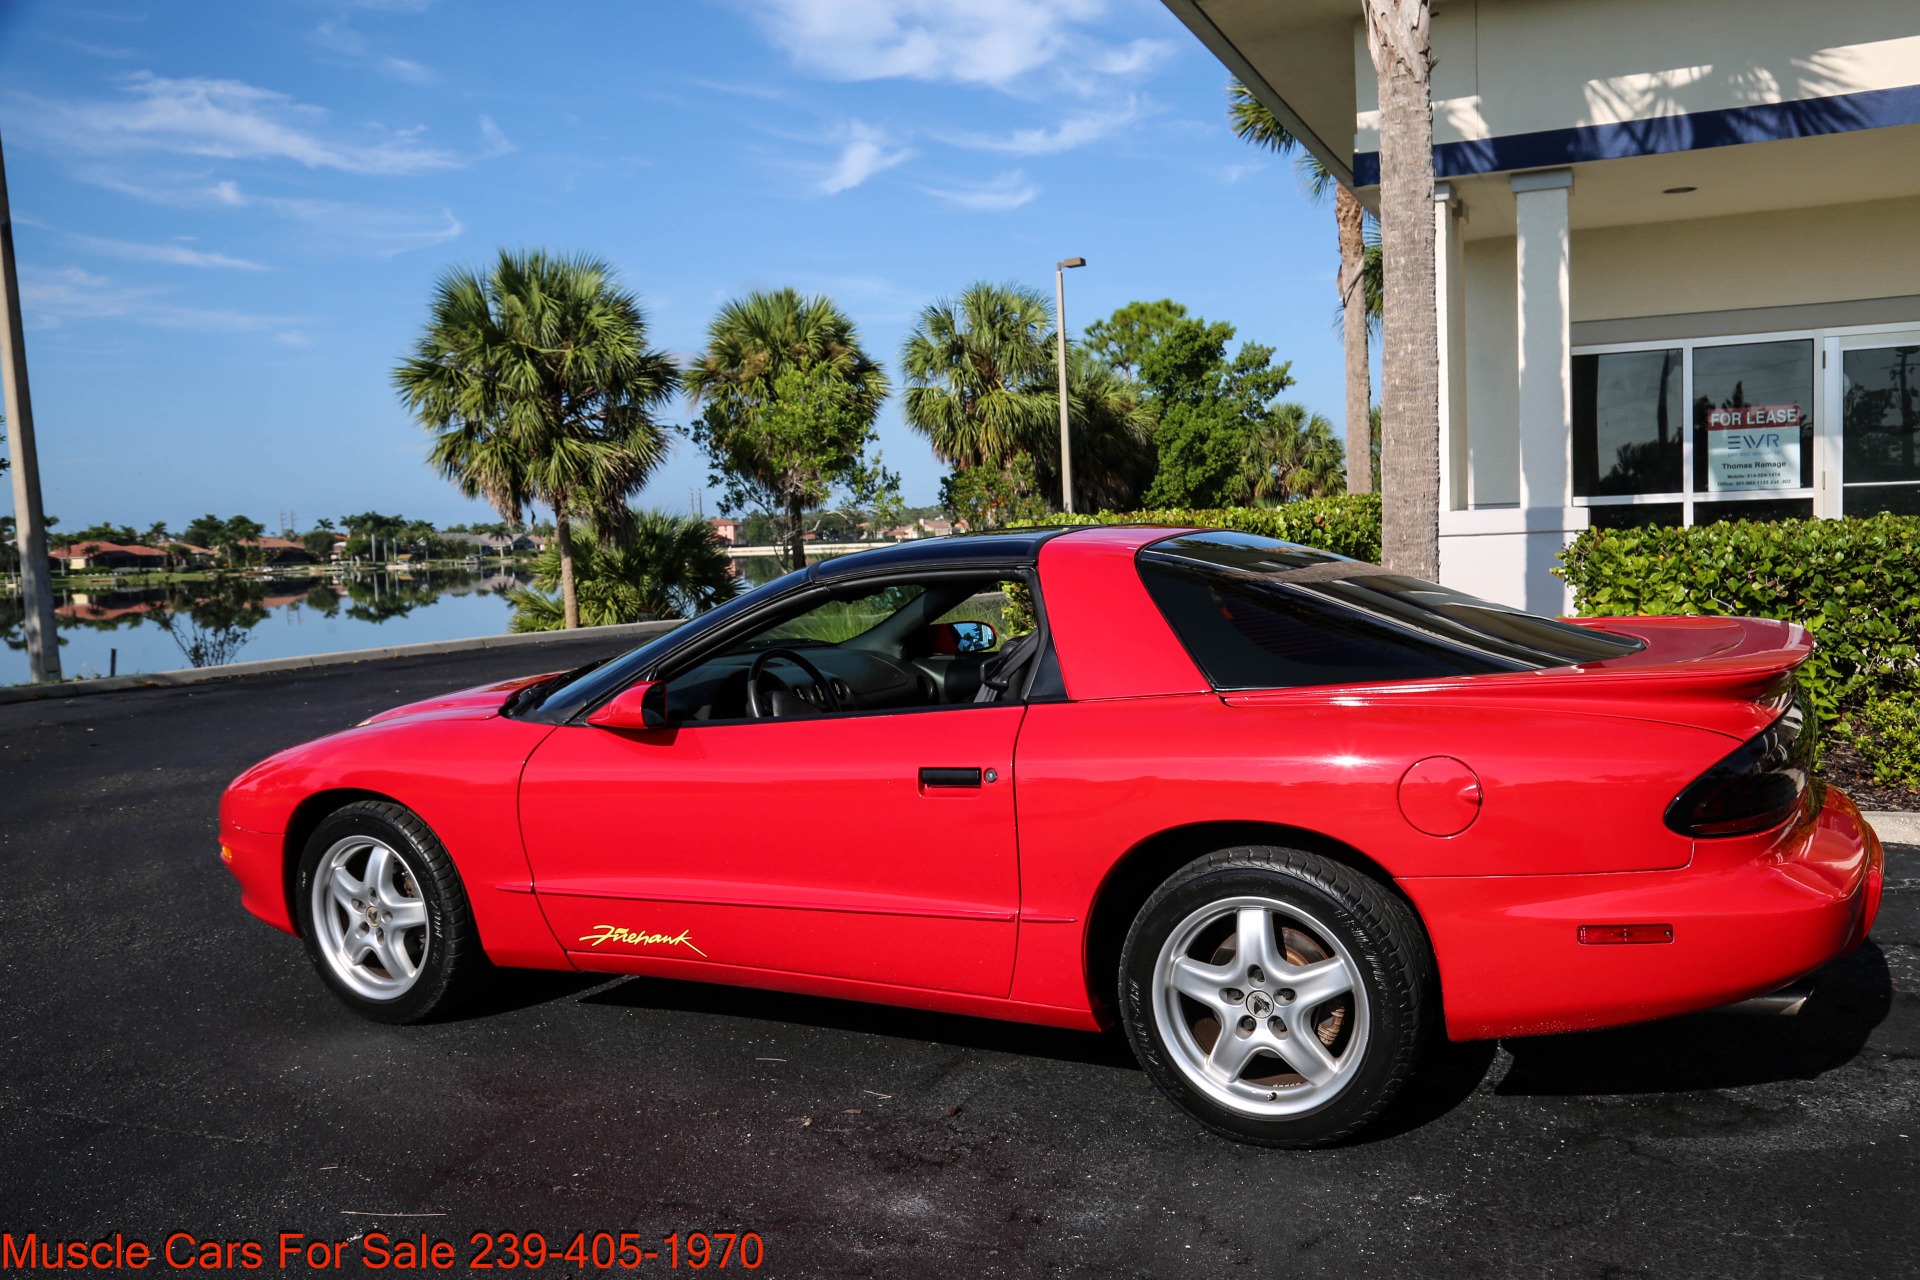 Used 1995 Pontiac Firebird FireHawk Fire Hawk for sale $21,000 at Muscle Cars for Sale Inc. in Fort Myers FL 33912 8